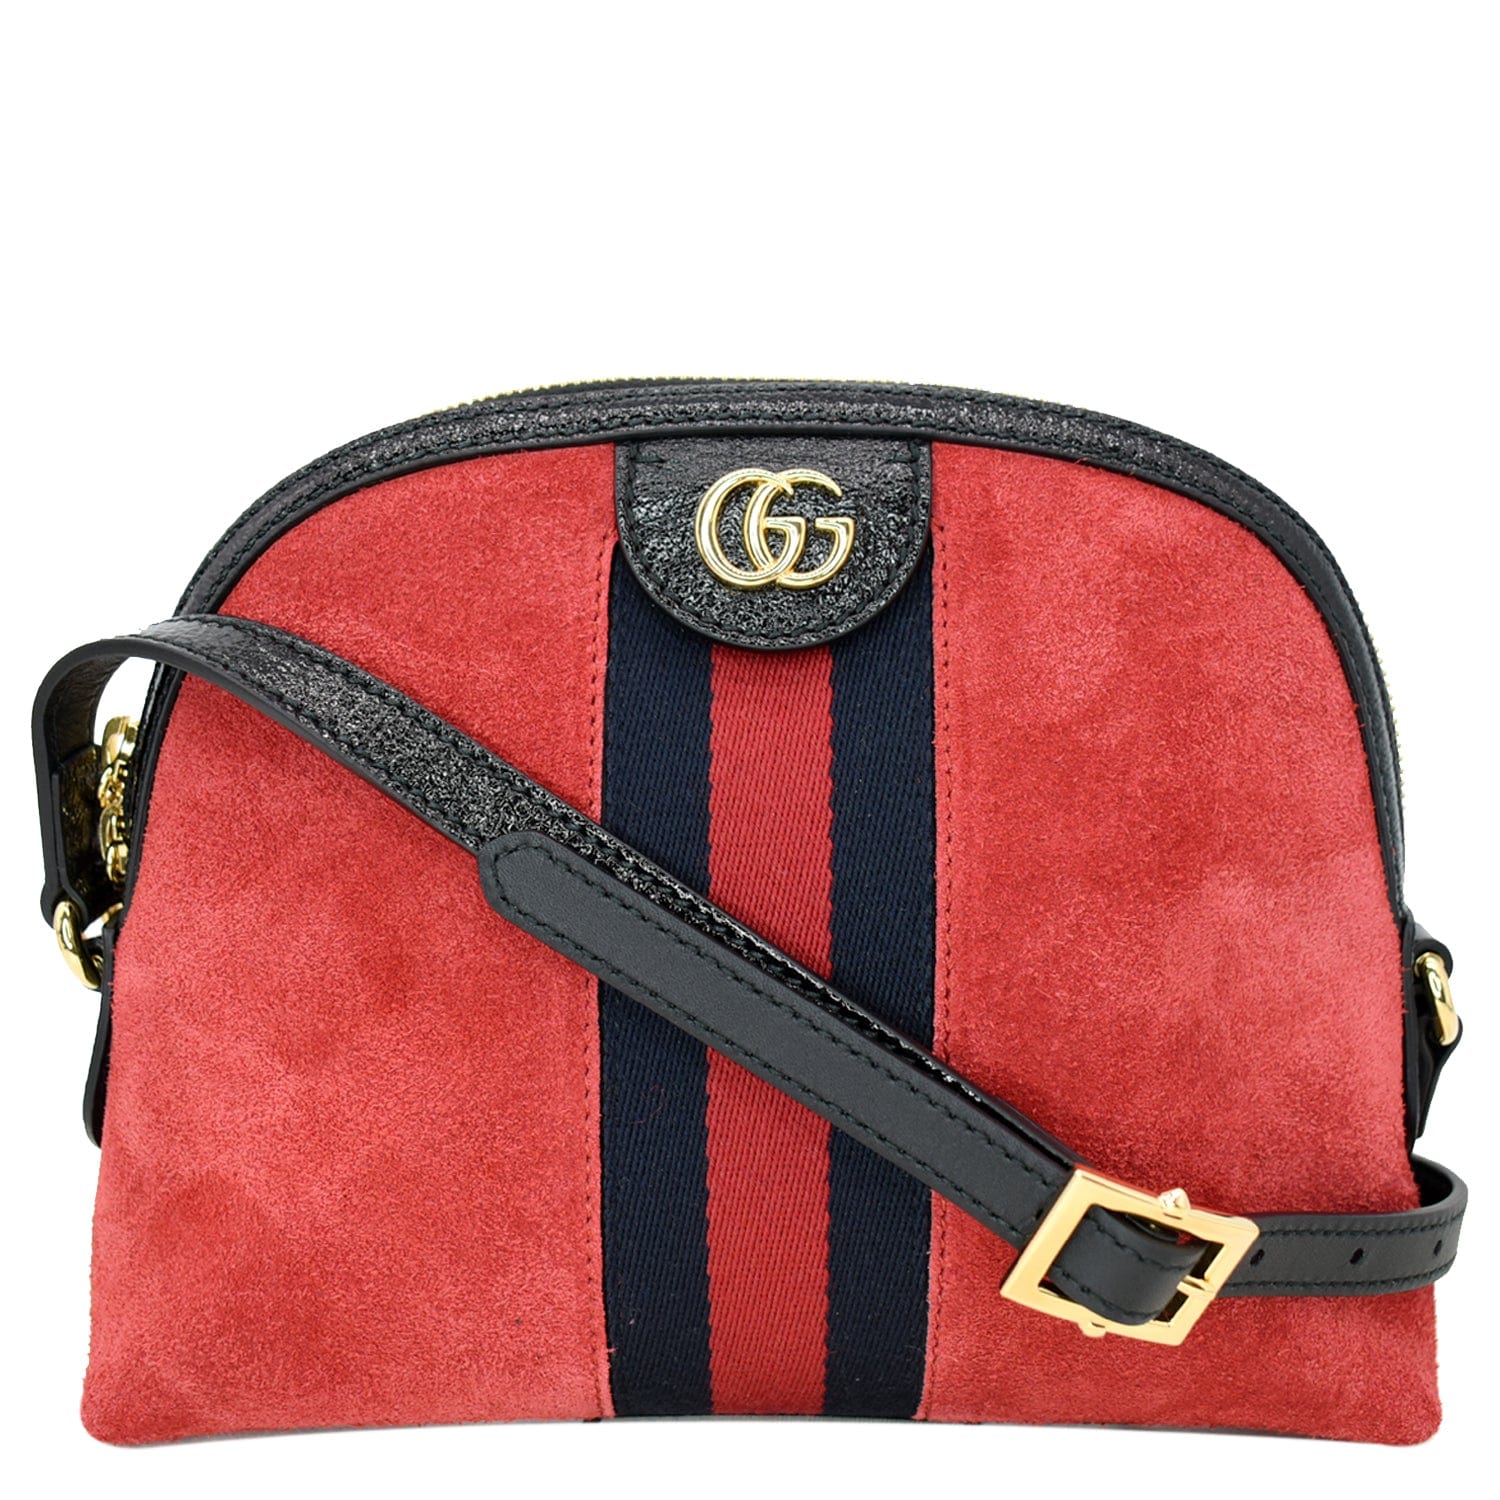 Gucci Ophidia GG Blue/Red Small Shoulder Bag